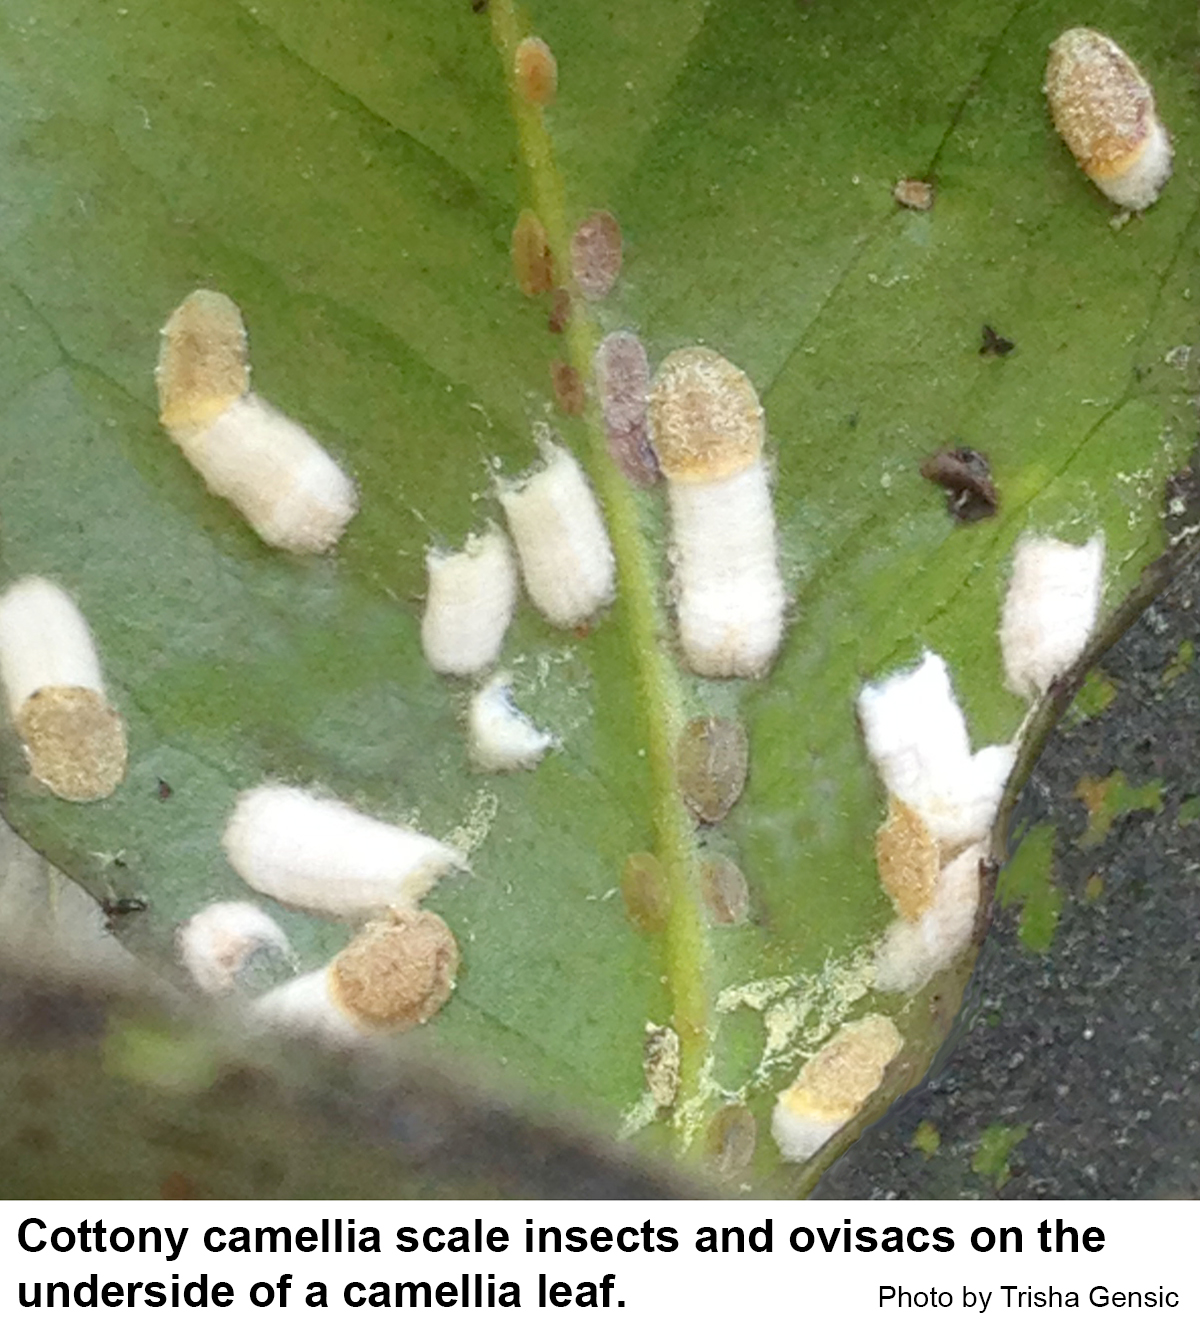 Cottony camellia scale insects and ovisacs on the underside of a camellia leaf